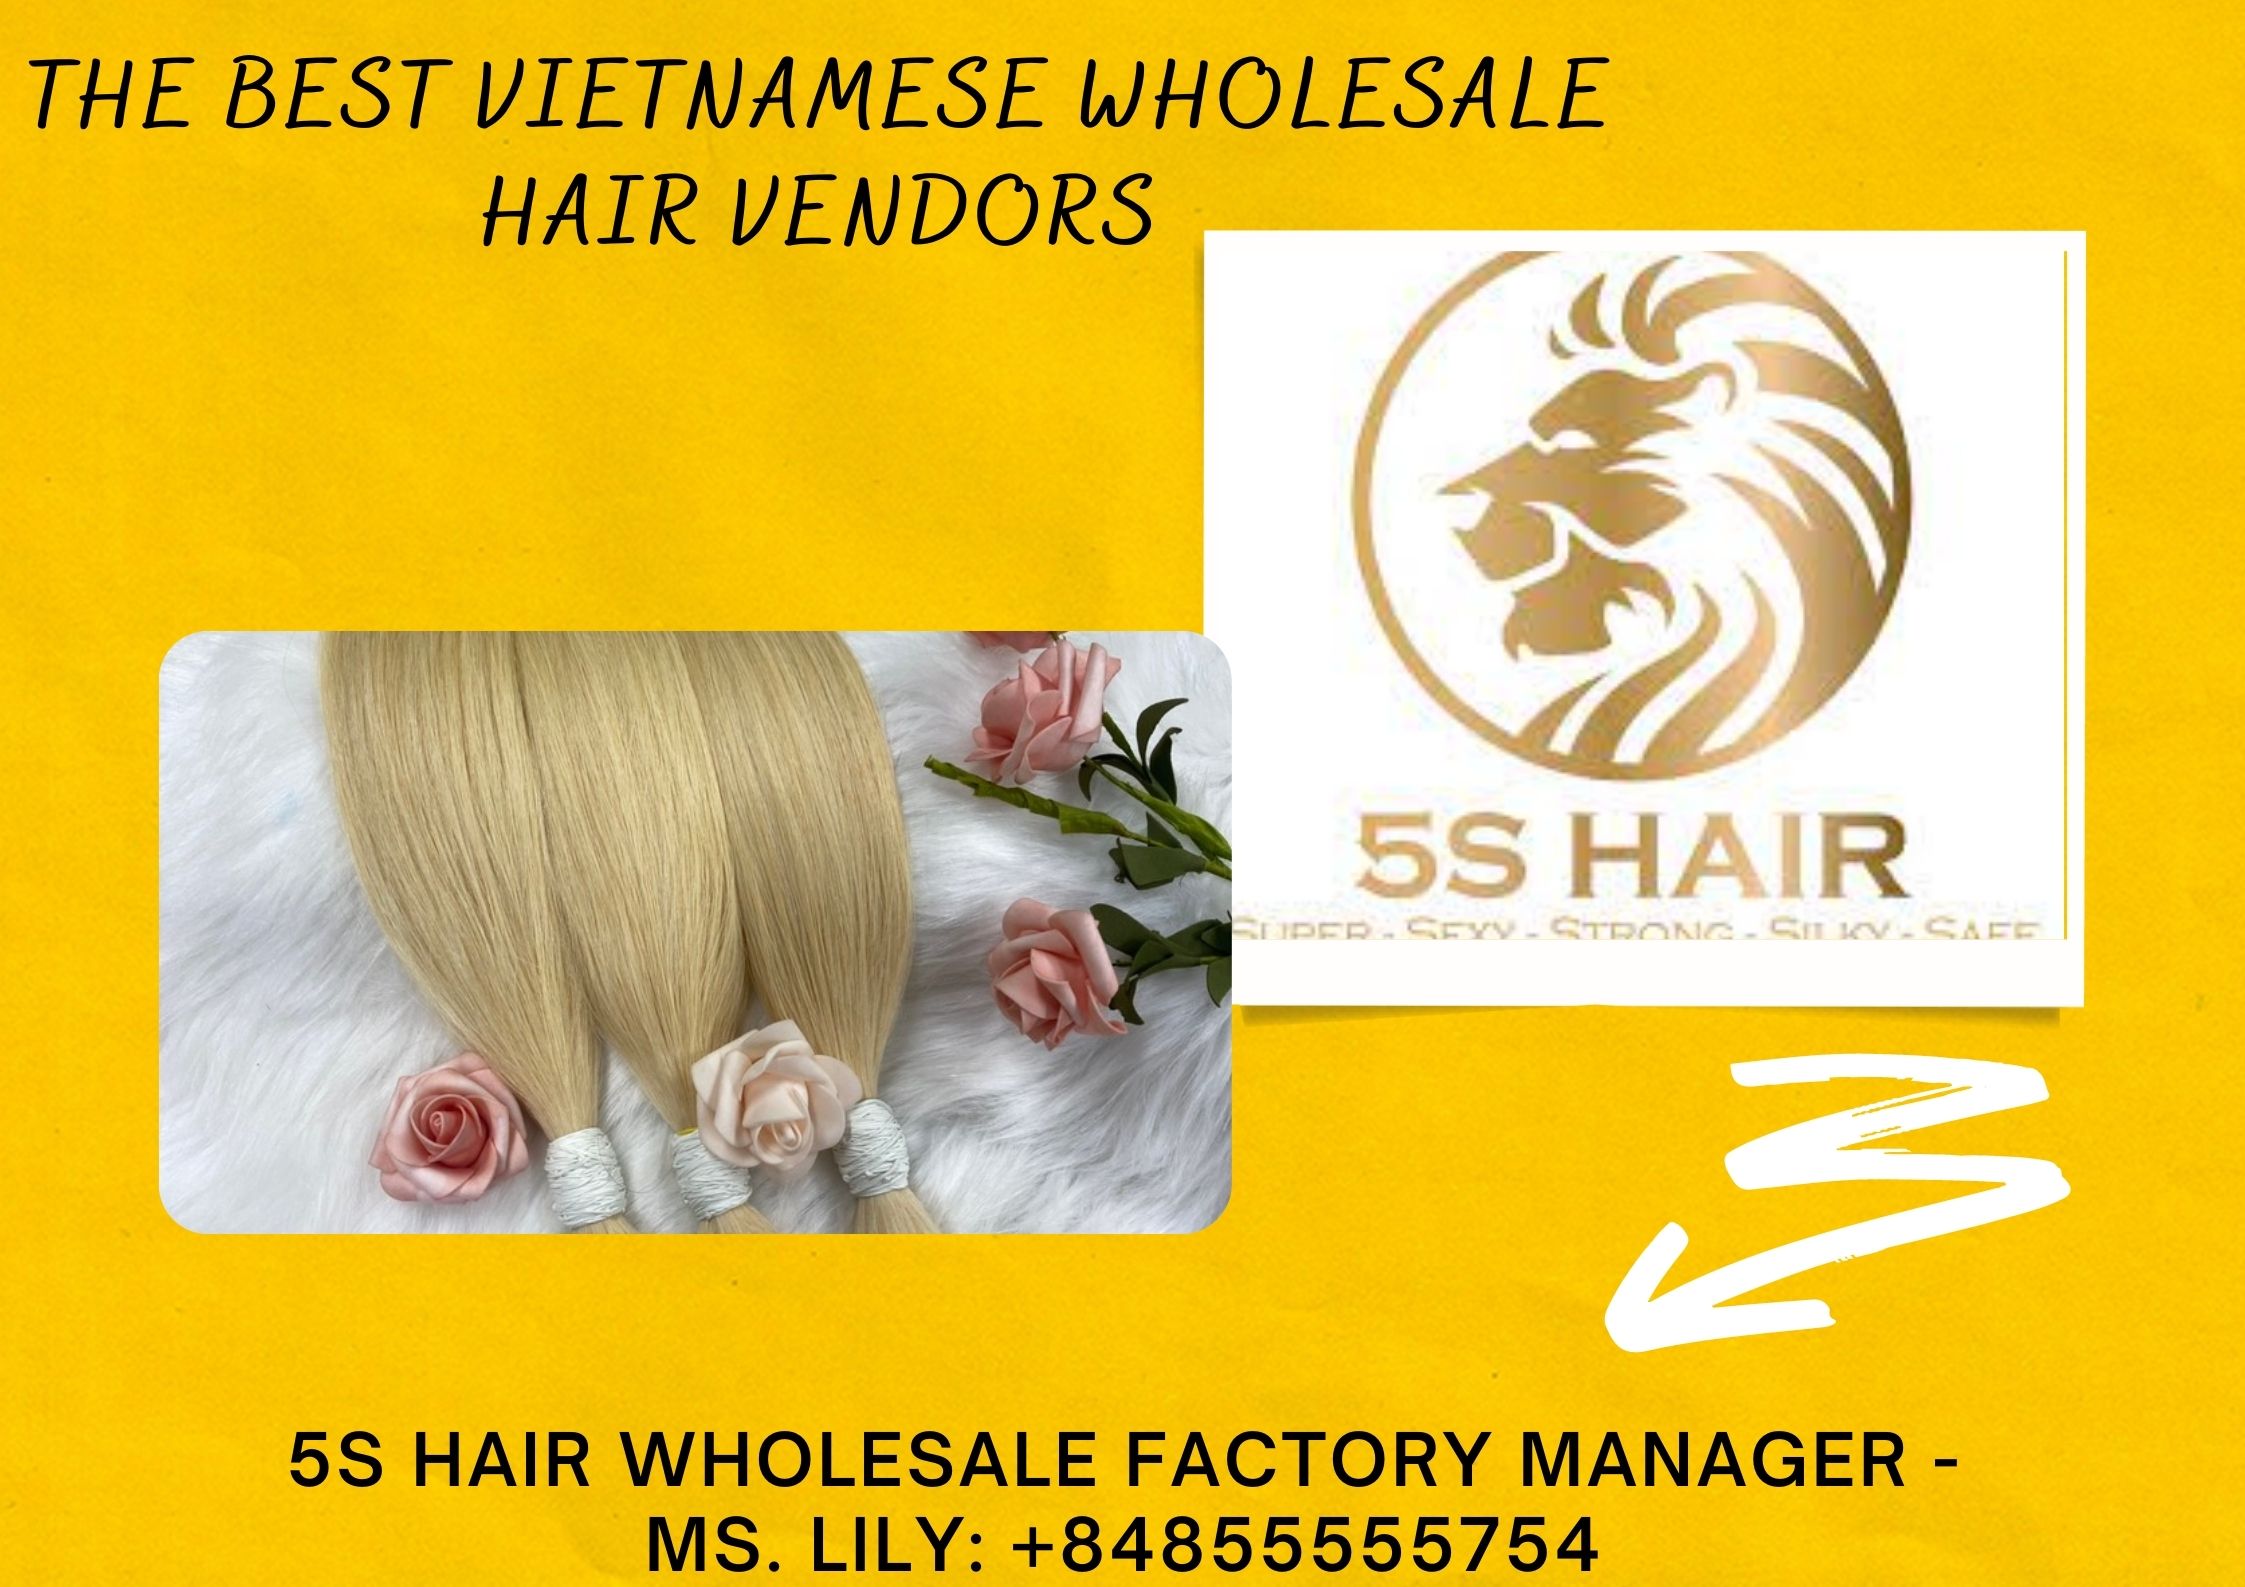 what-are-the-benefits-of-the-5s-hair-factory-as-a-hair-extension-market-in-vietnam-2